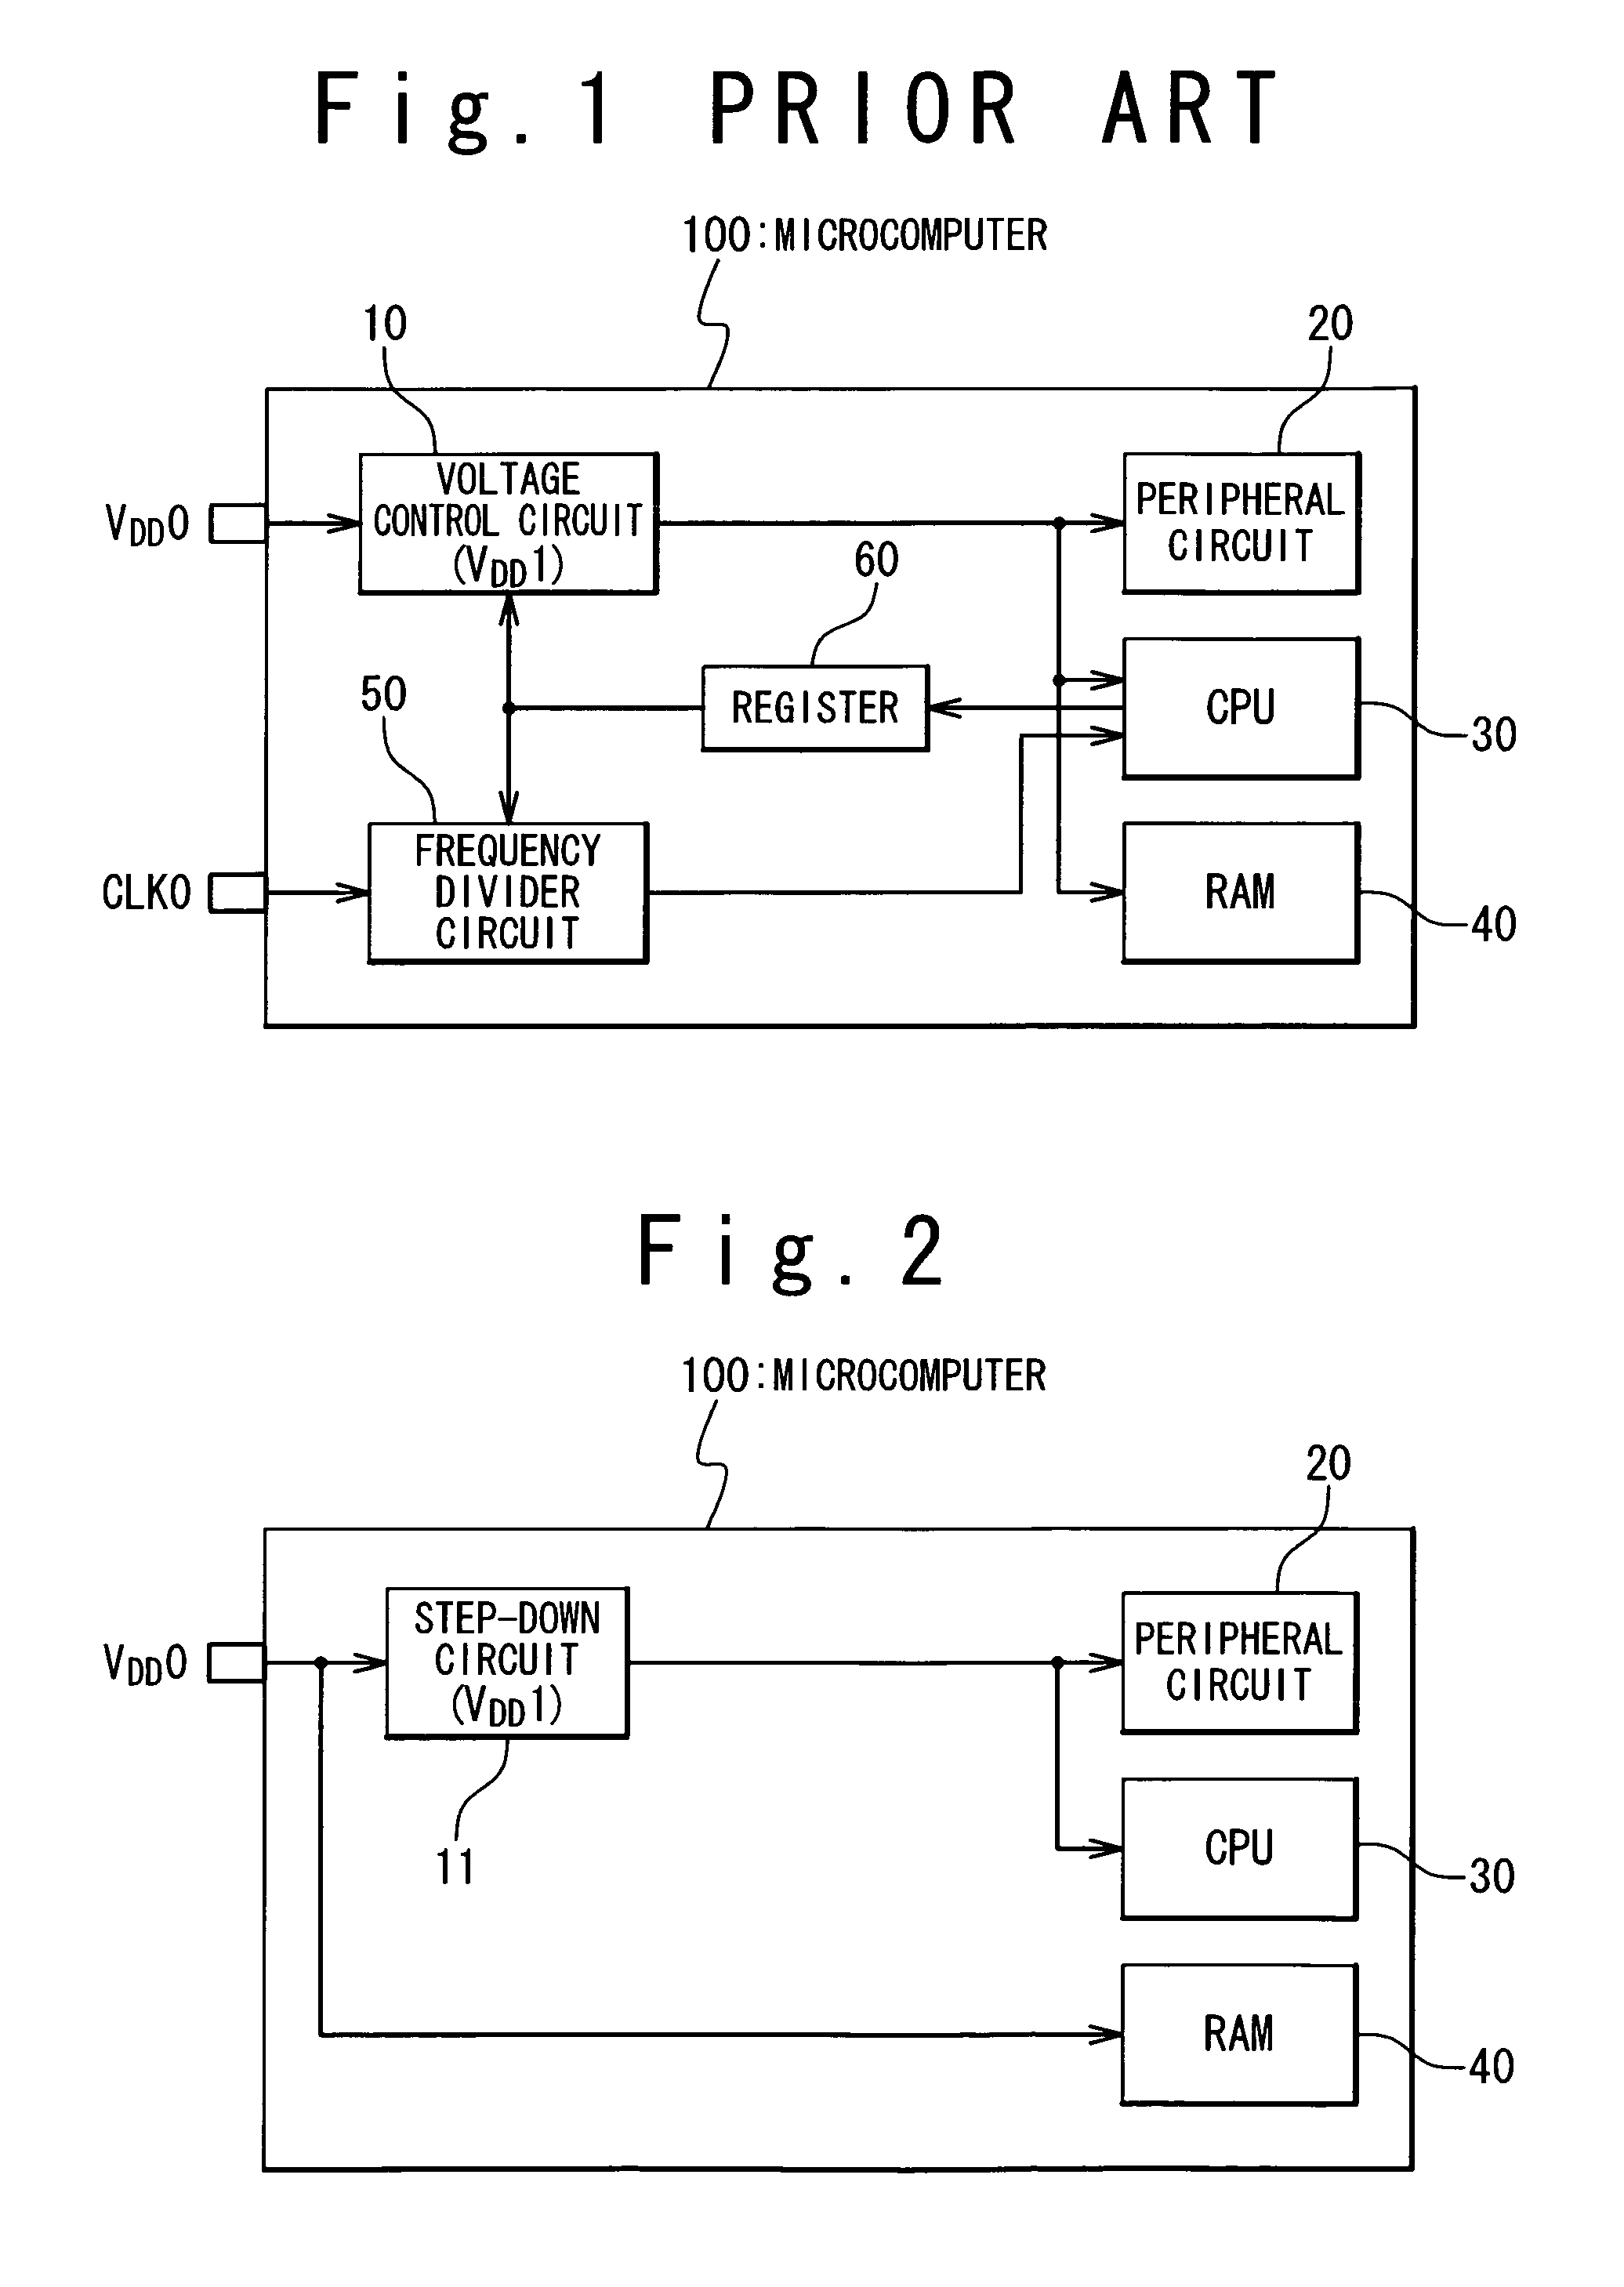 Semiconductor device for reducing soft error rate with reduced power consumption